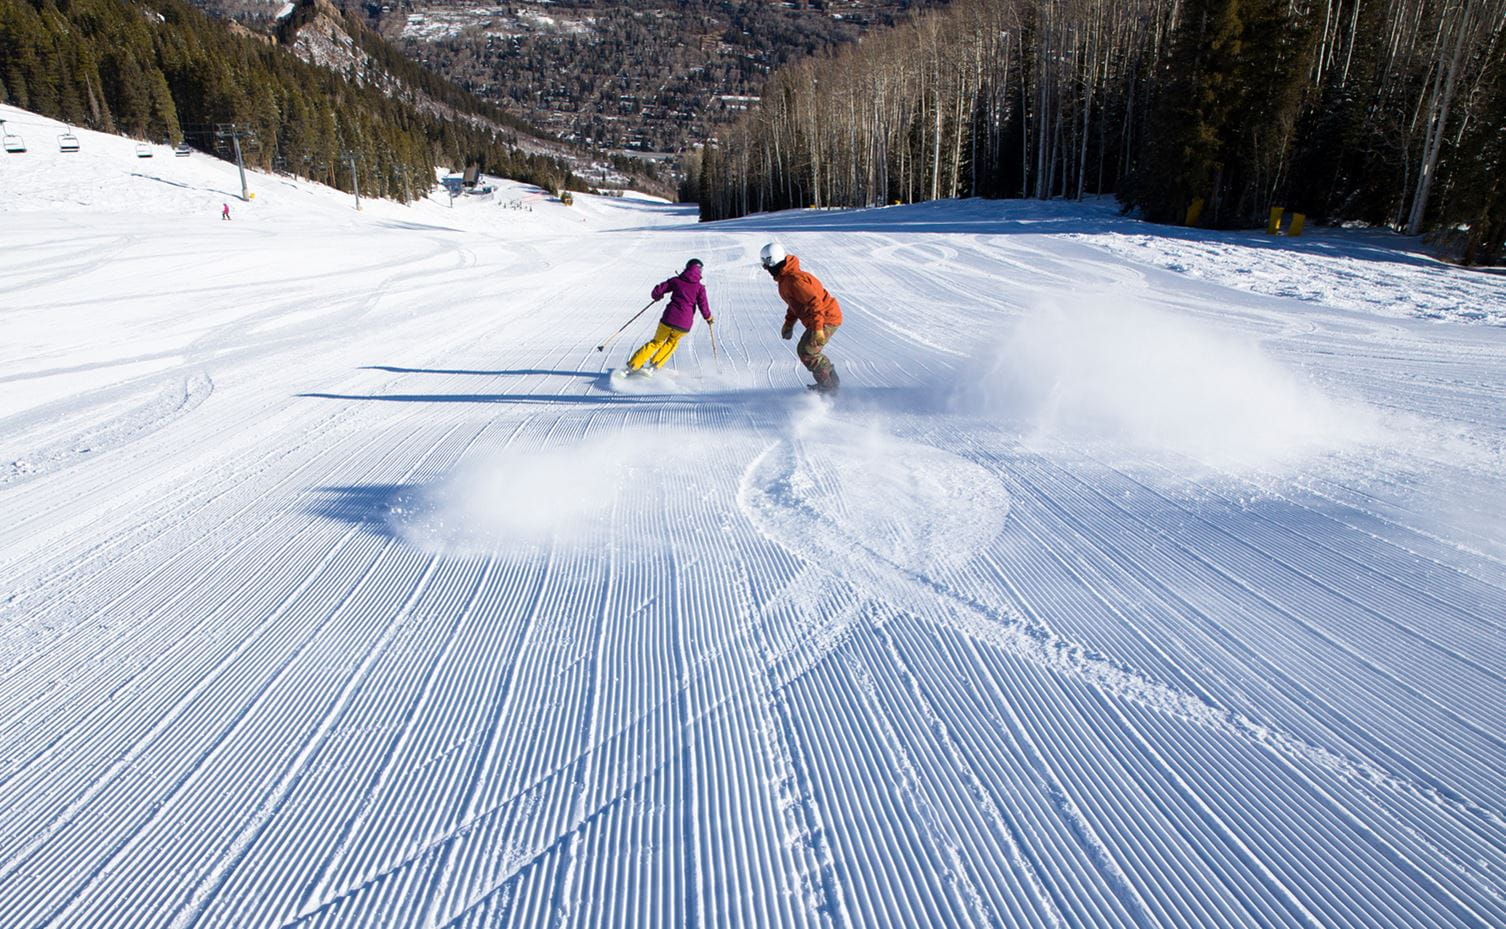 A skier and rider enjoy groomed terrain at Aspen Snowmass, Colorado - Ski with a Season Pass